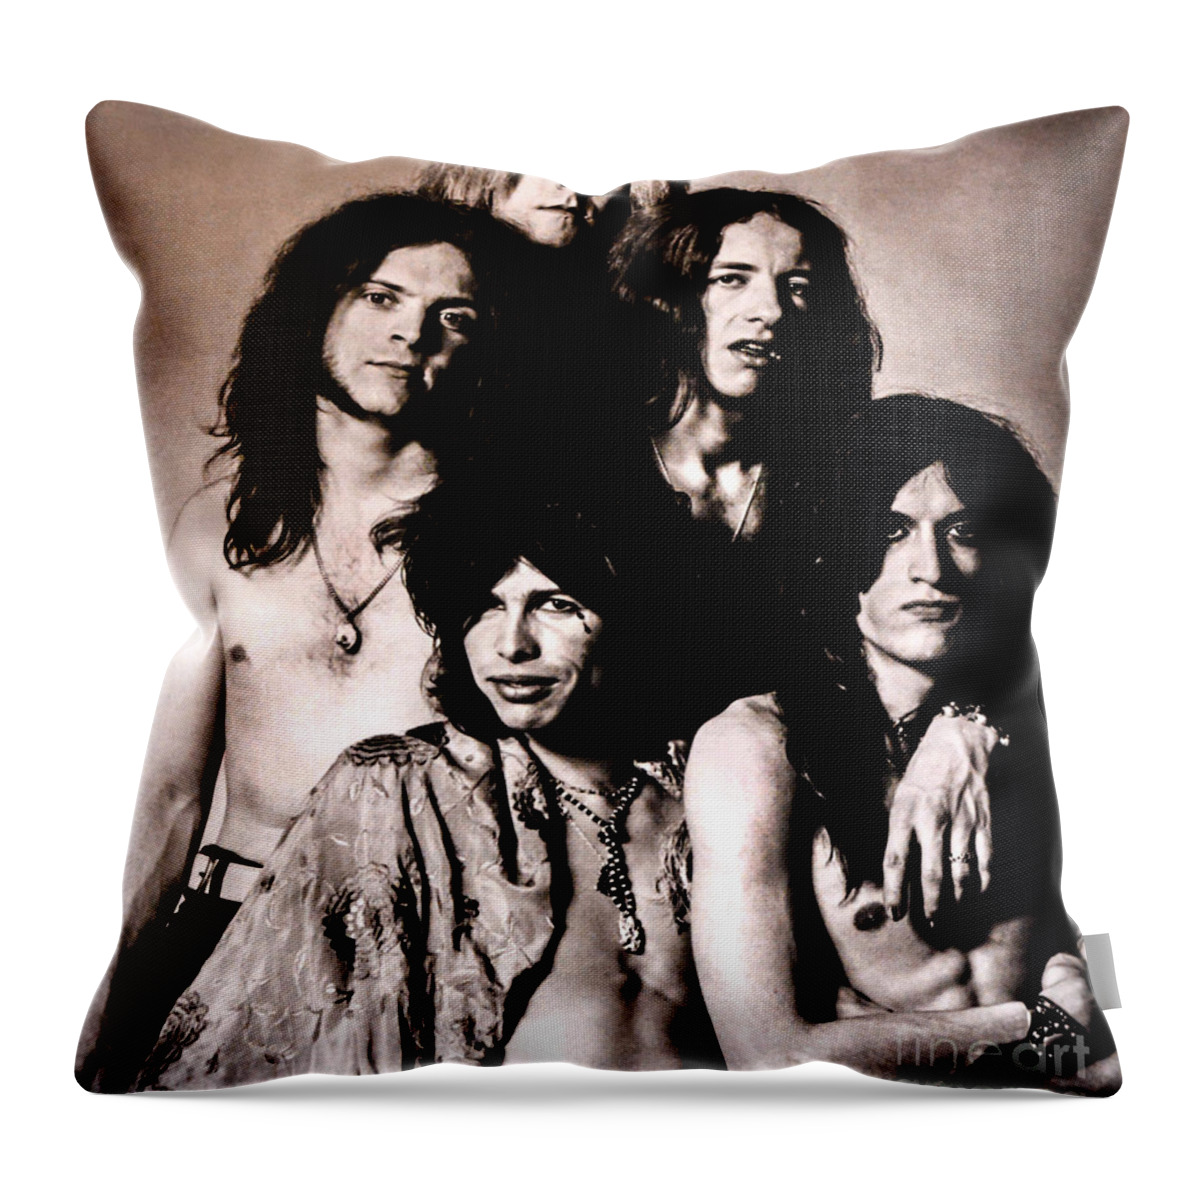 Music Throw Pillow featuring the photograph The Bad Boys From Boston by Gary Keesler